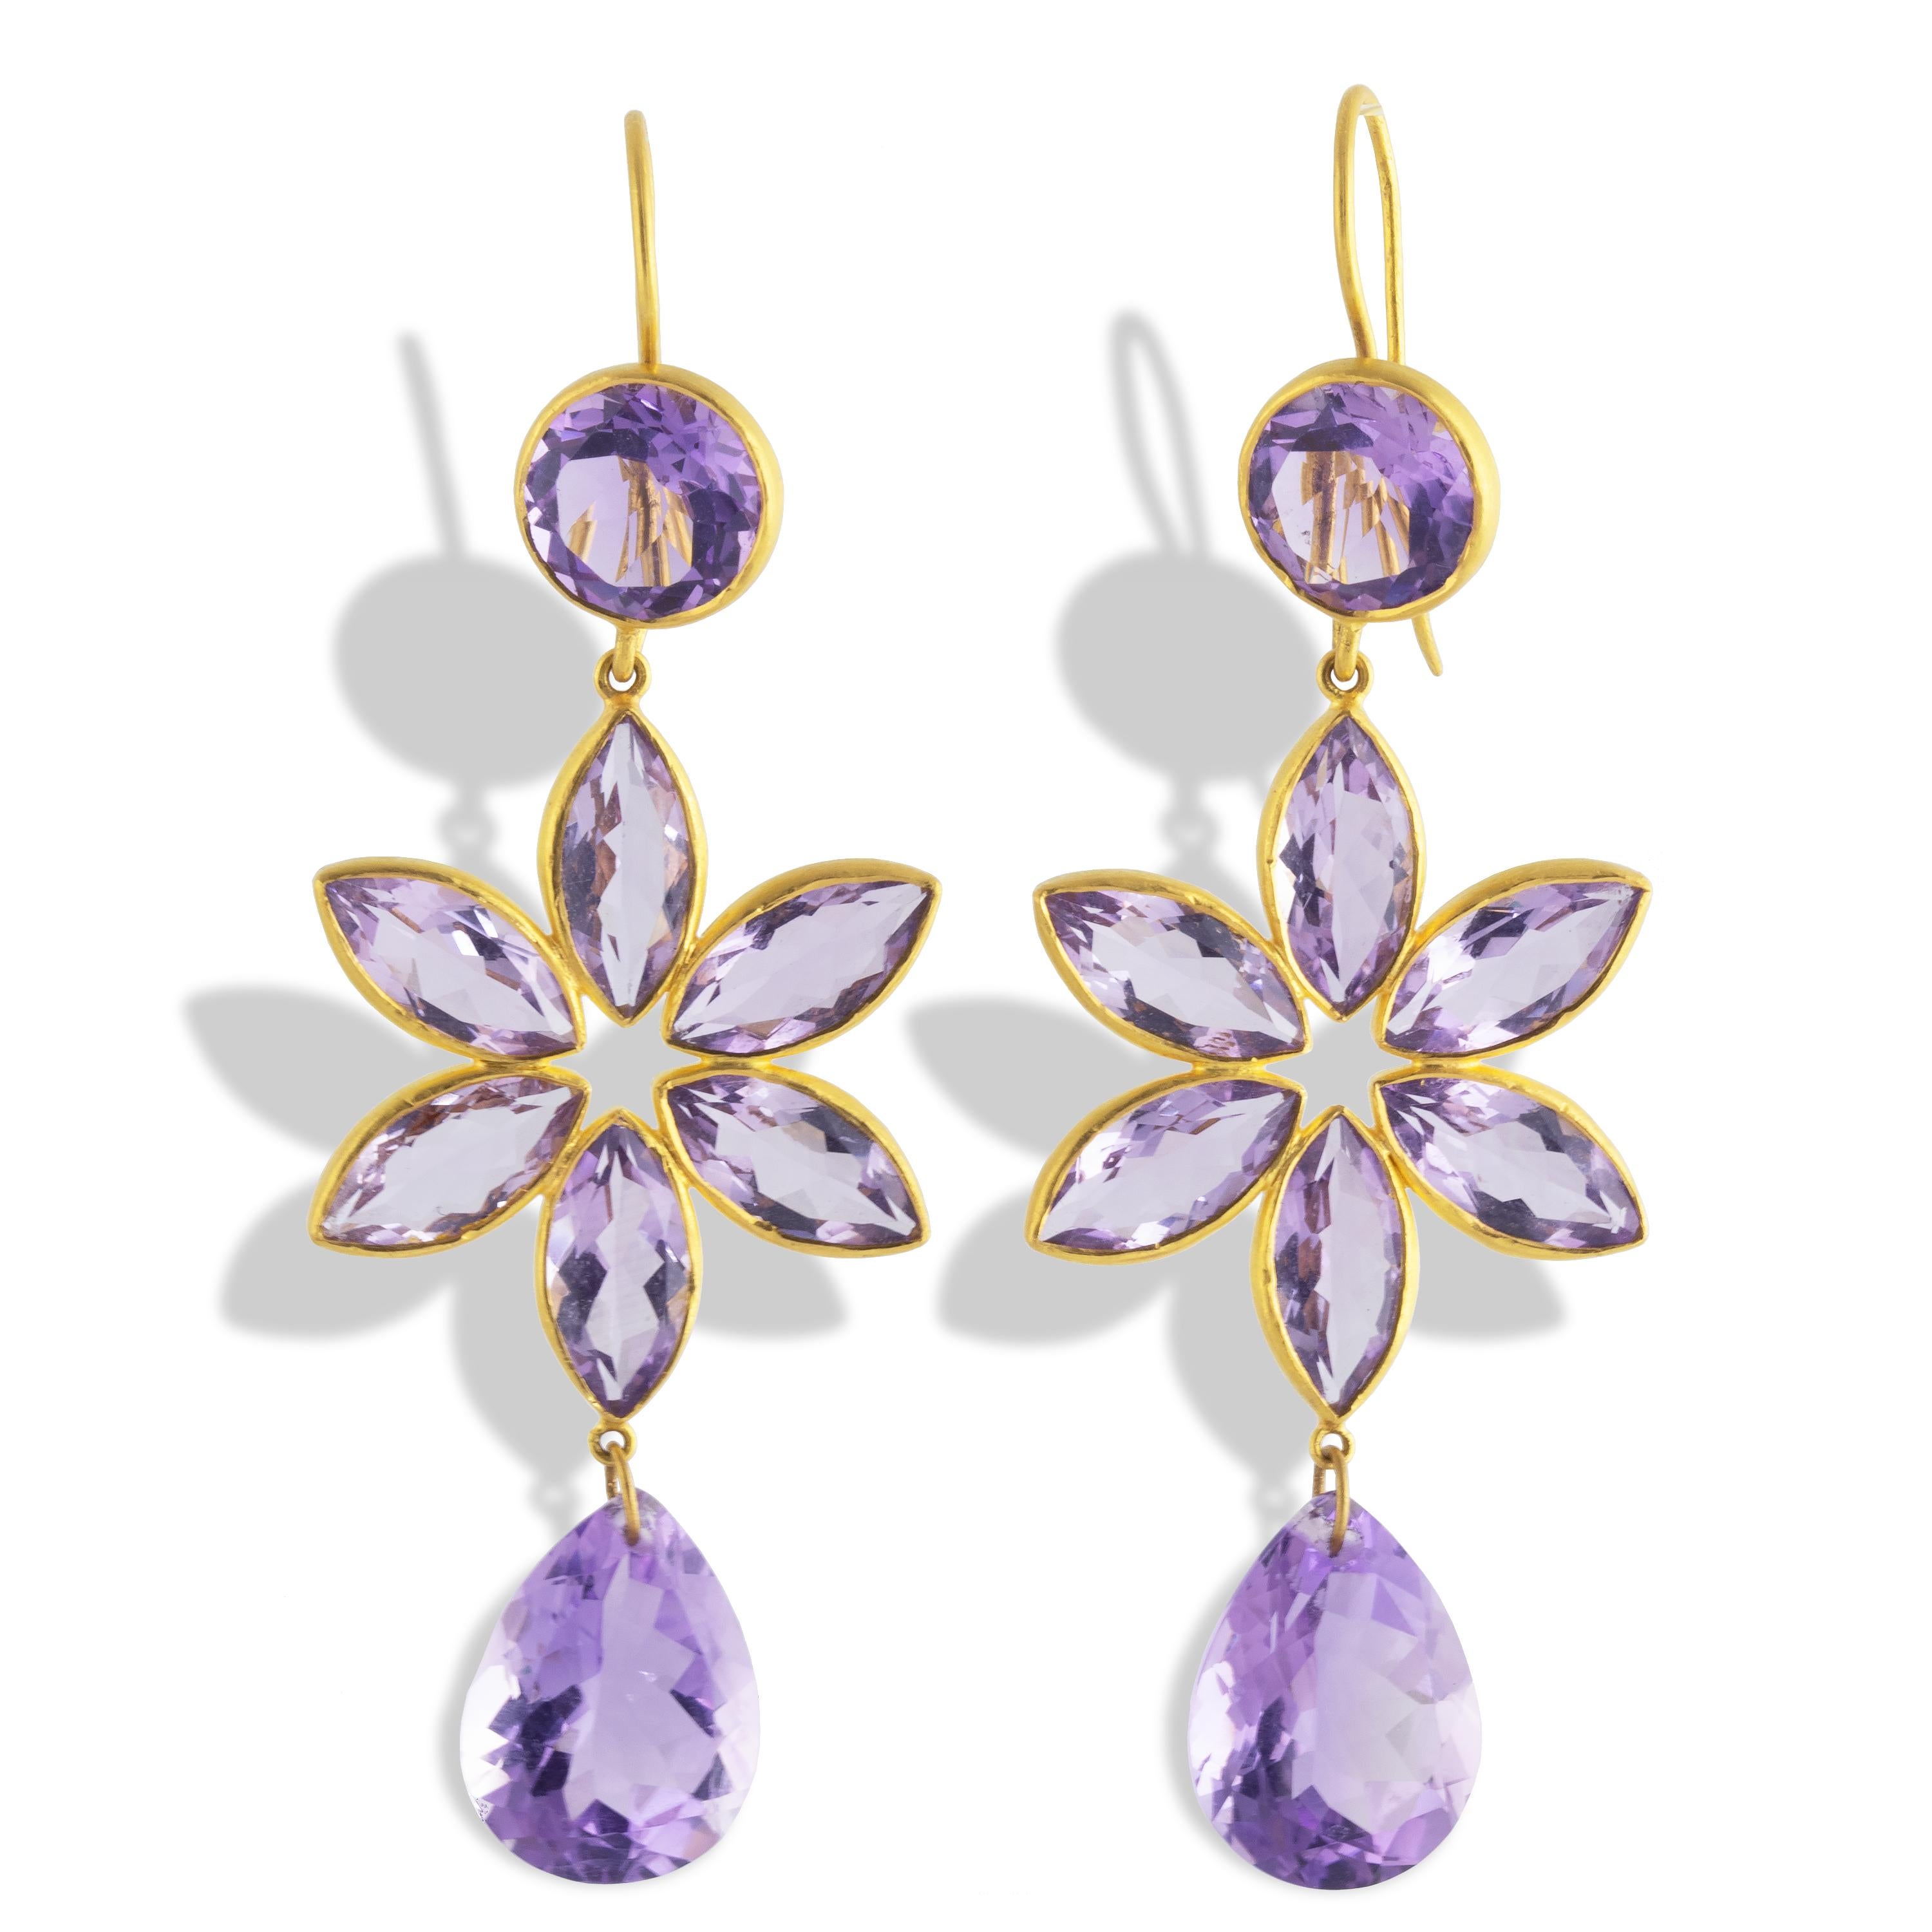 Set with 32.46 carats of radiant Brazilian Amethyst, these exquisite earrings are made with glowing, marquise, round and pear-shaped gemstones.   Set in 22k matte gold.

Amethyst served royalty throughout history and was considered in ancient times